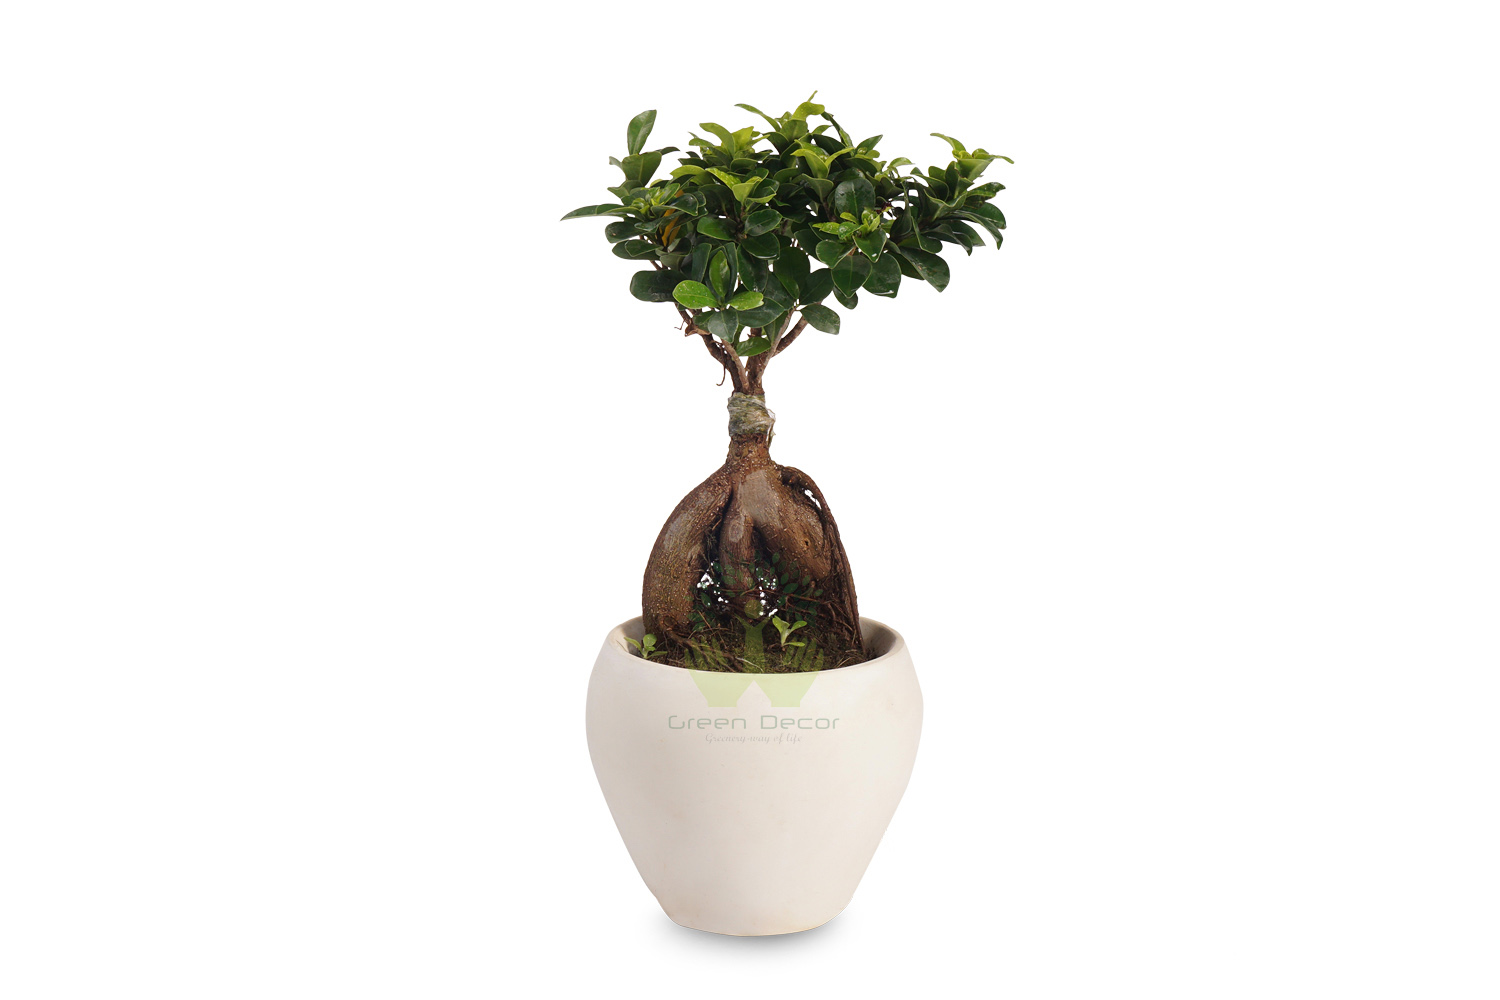 Buy Ficus Plants , White Pots and seeds in Delhi NCR by the best online nursery shop Greendecor.